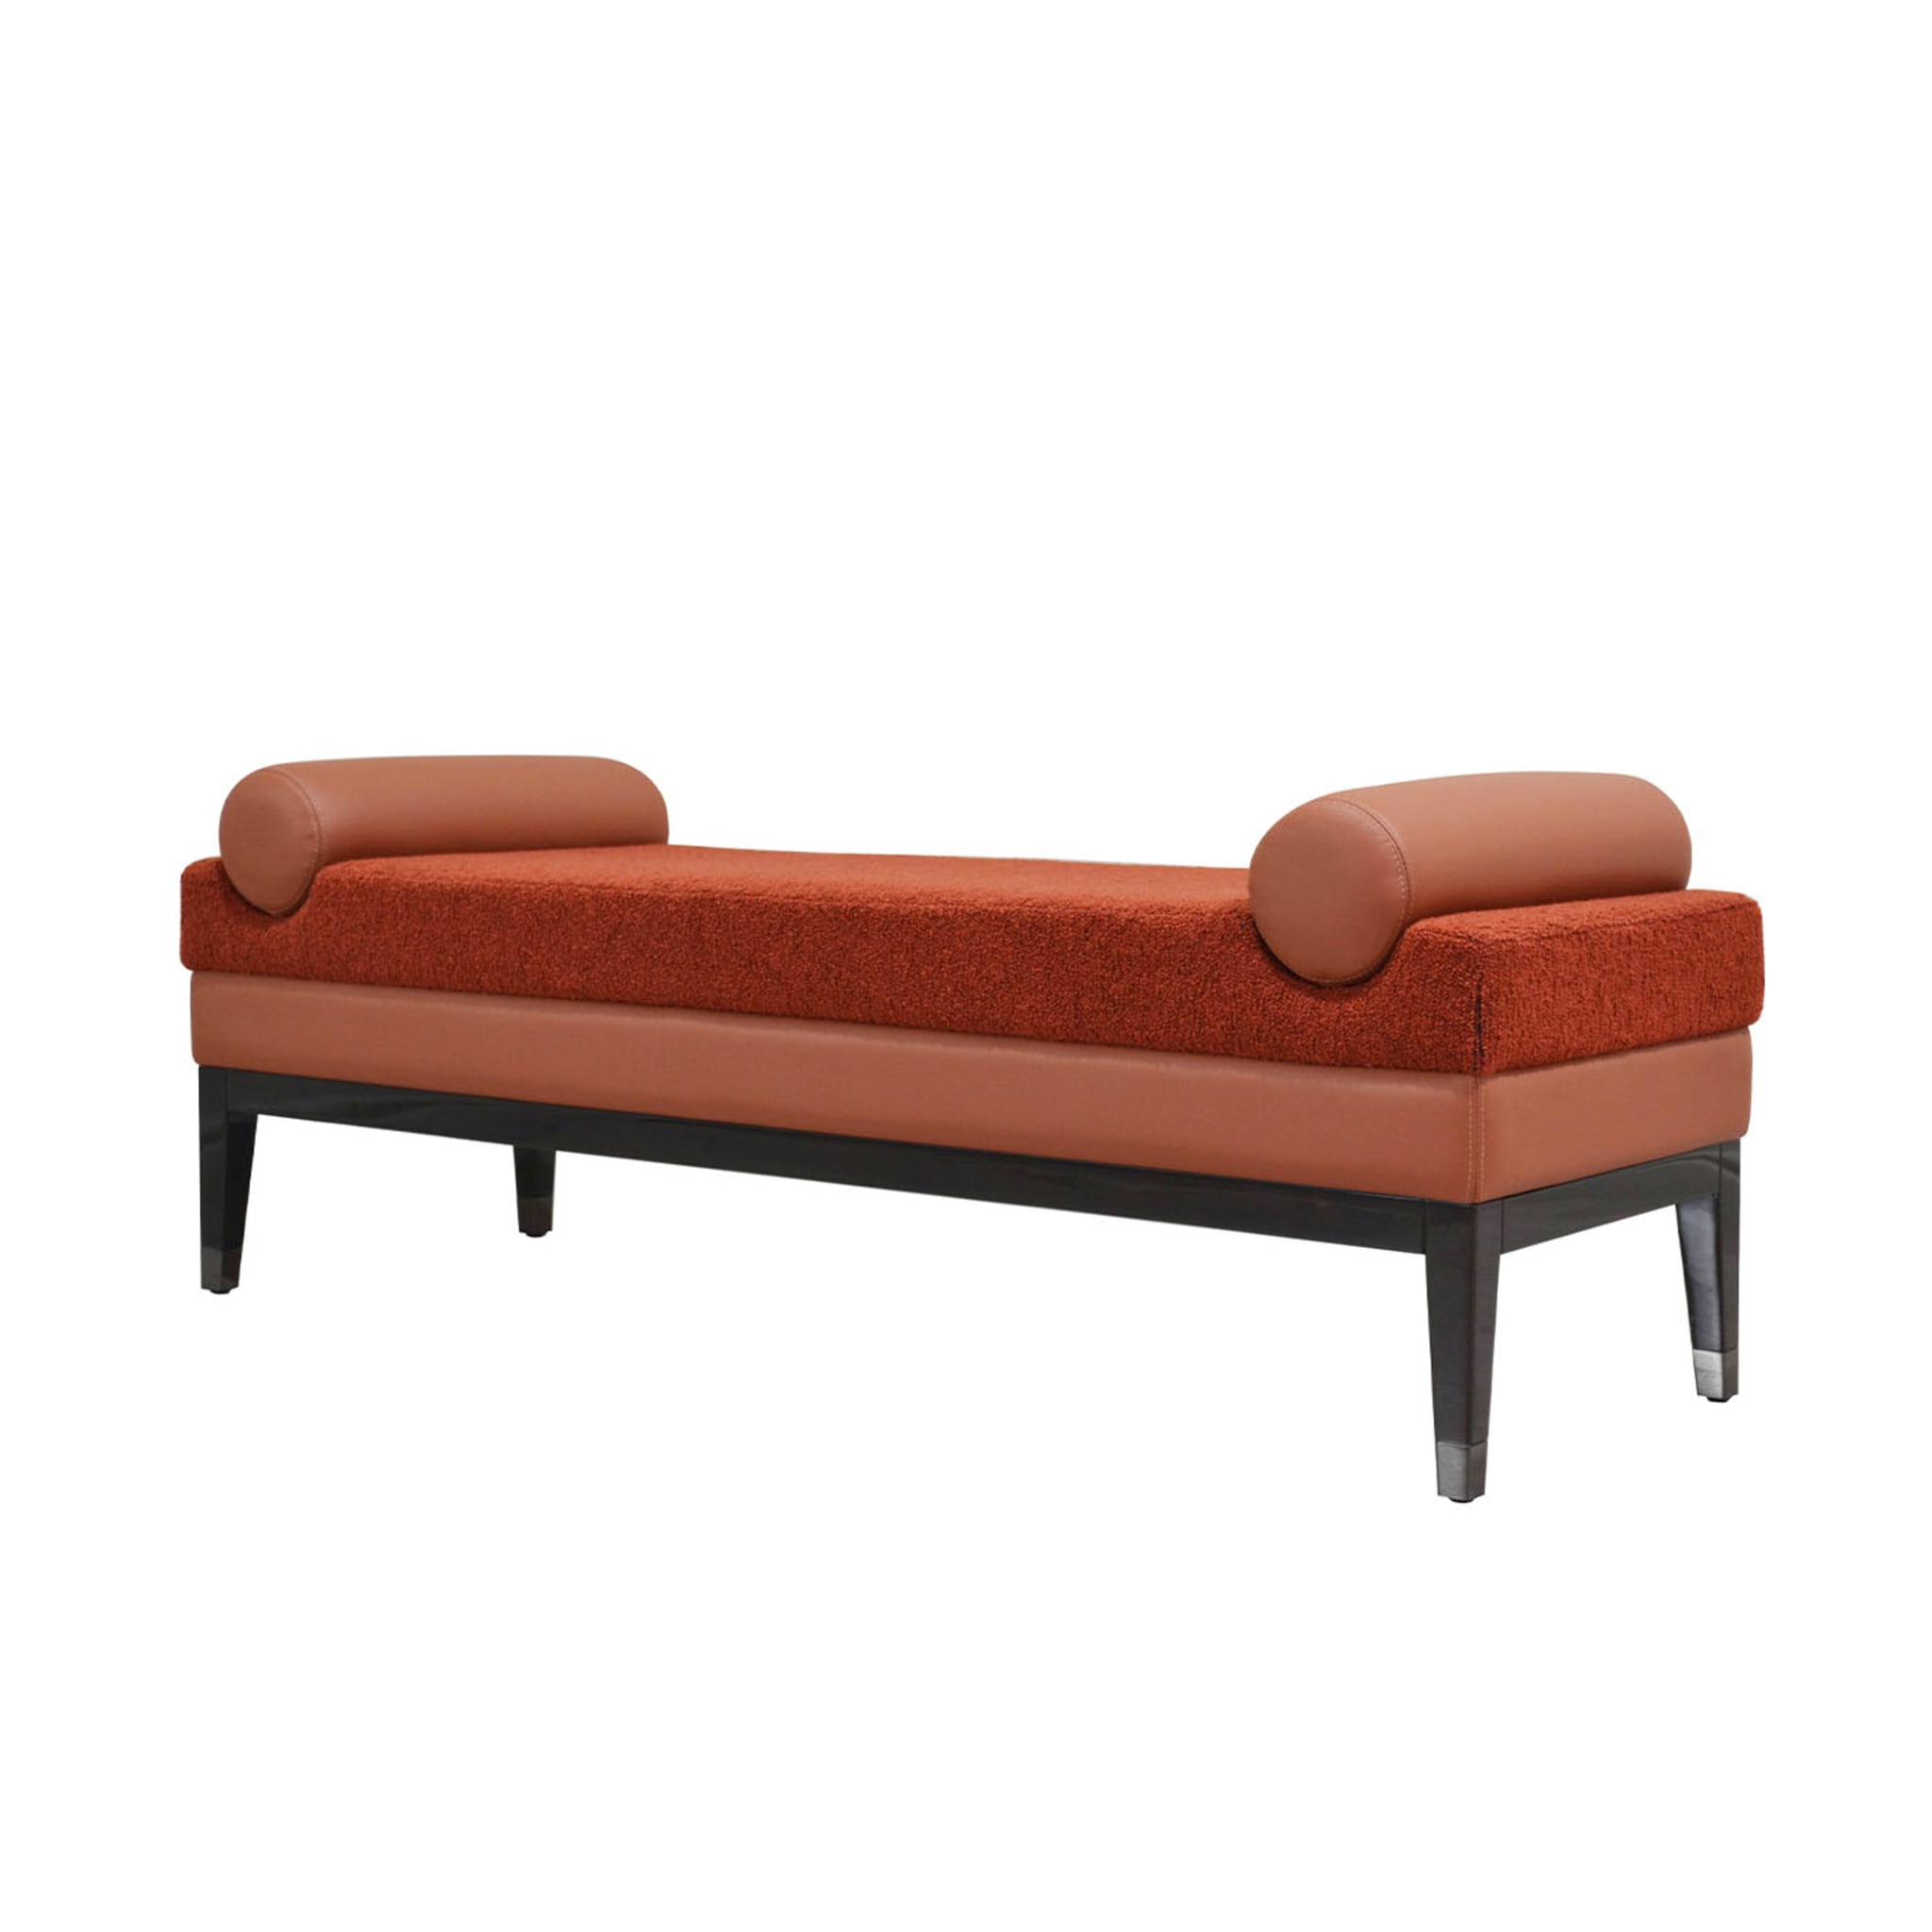 Italian Contemporary Upholstered Bench In Terracotta Fabric  - Alternative view 1